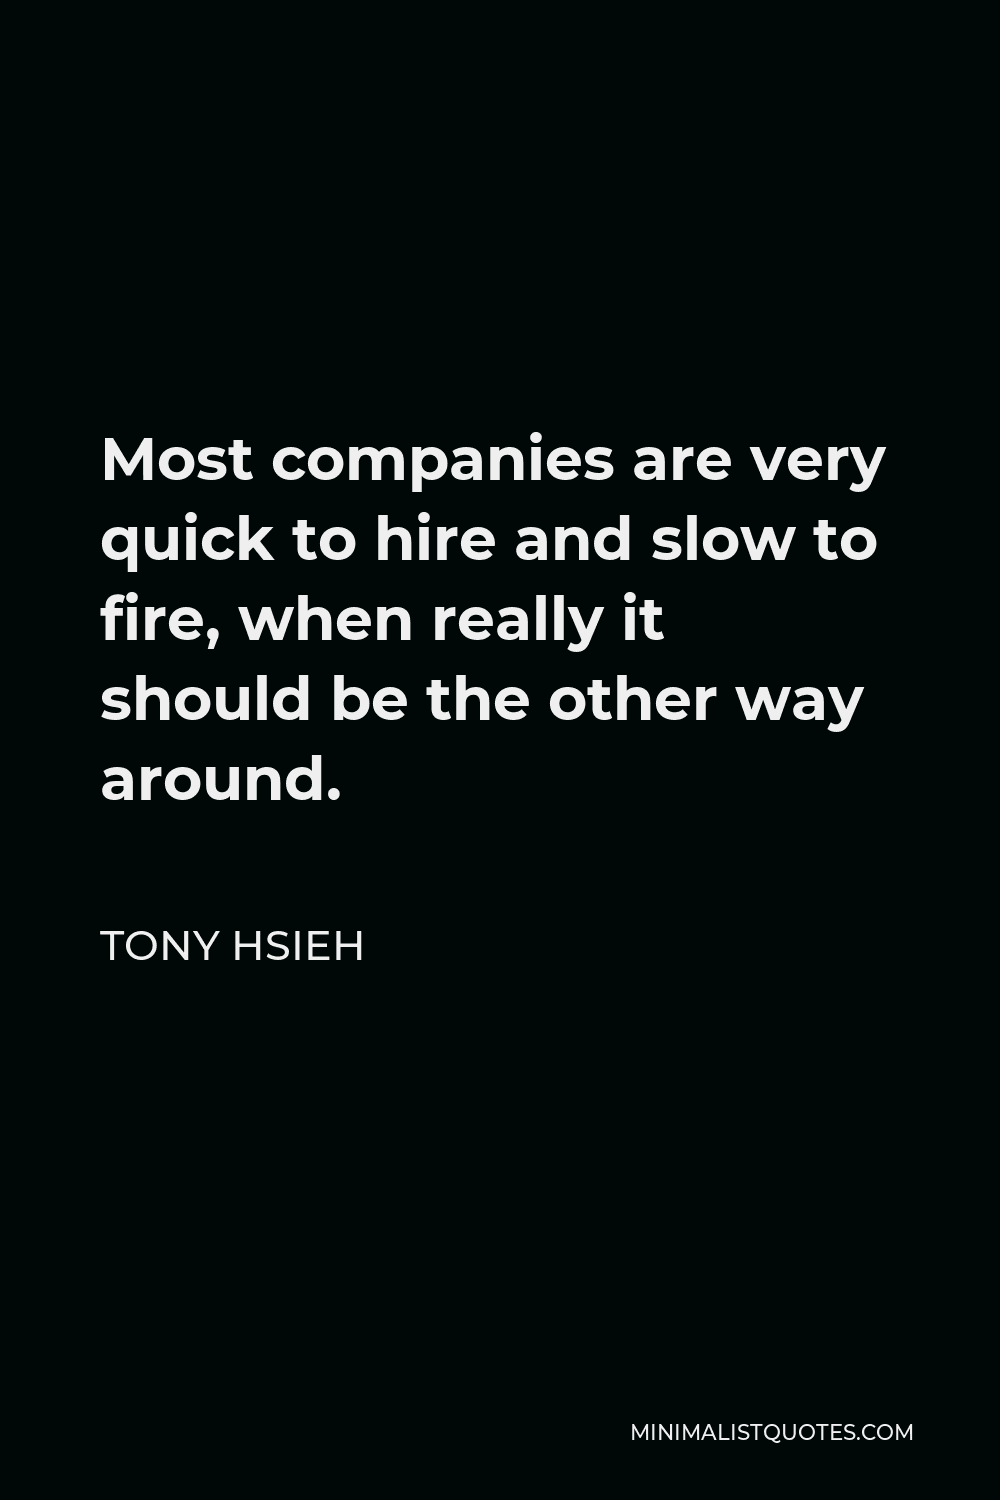 Tony Hsieh Quote - Most companies are very quick to hire and slow to fire, when really it should be the other way around.